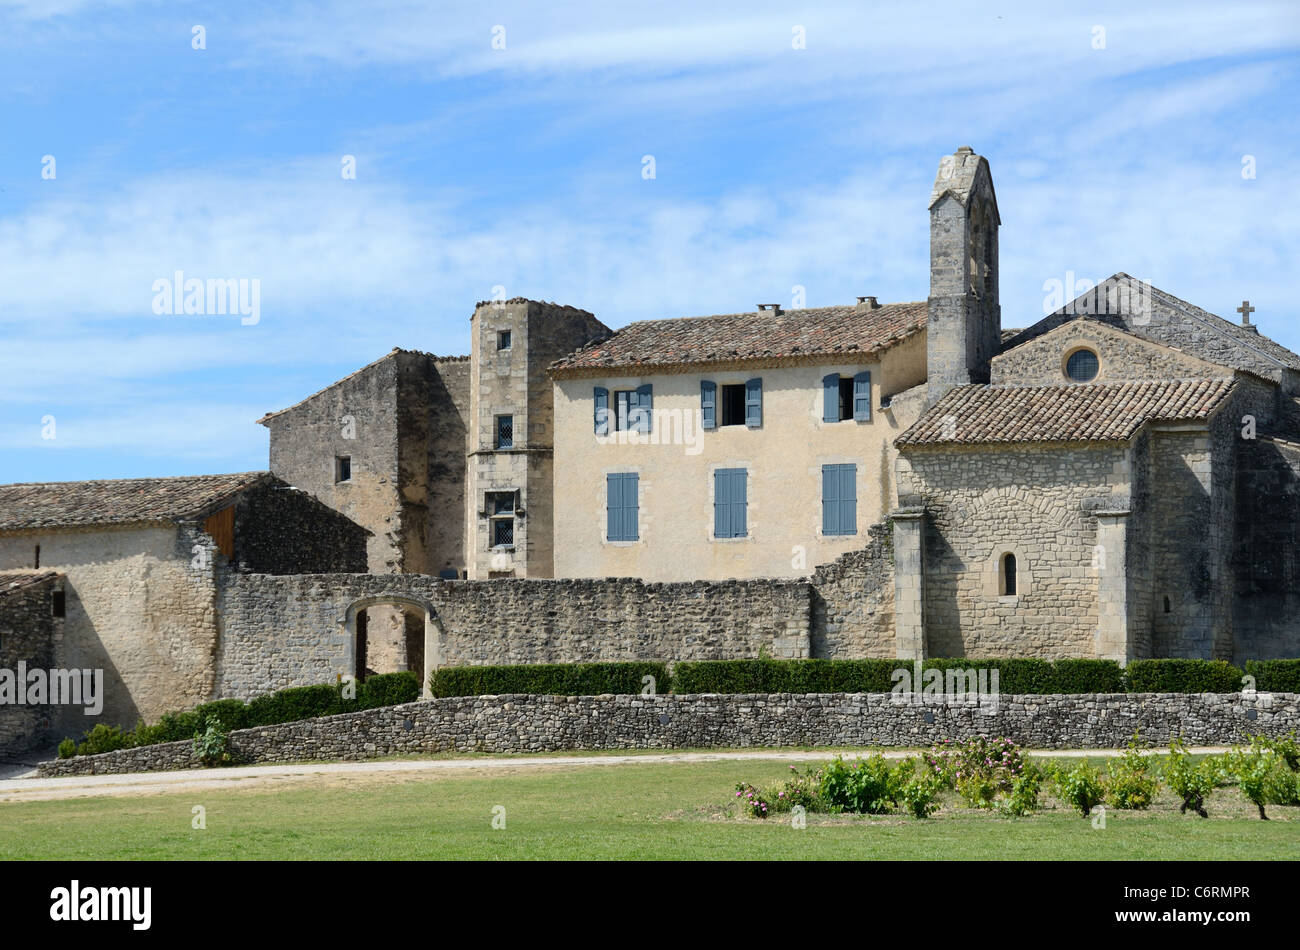 Salagon Priory or Convent (c12th), Mane, Provence Stock Photo